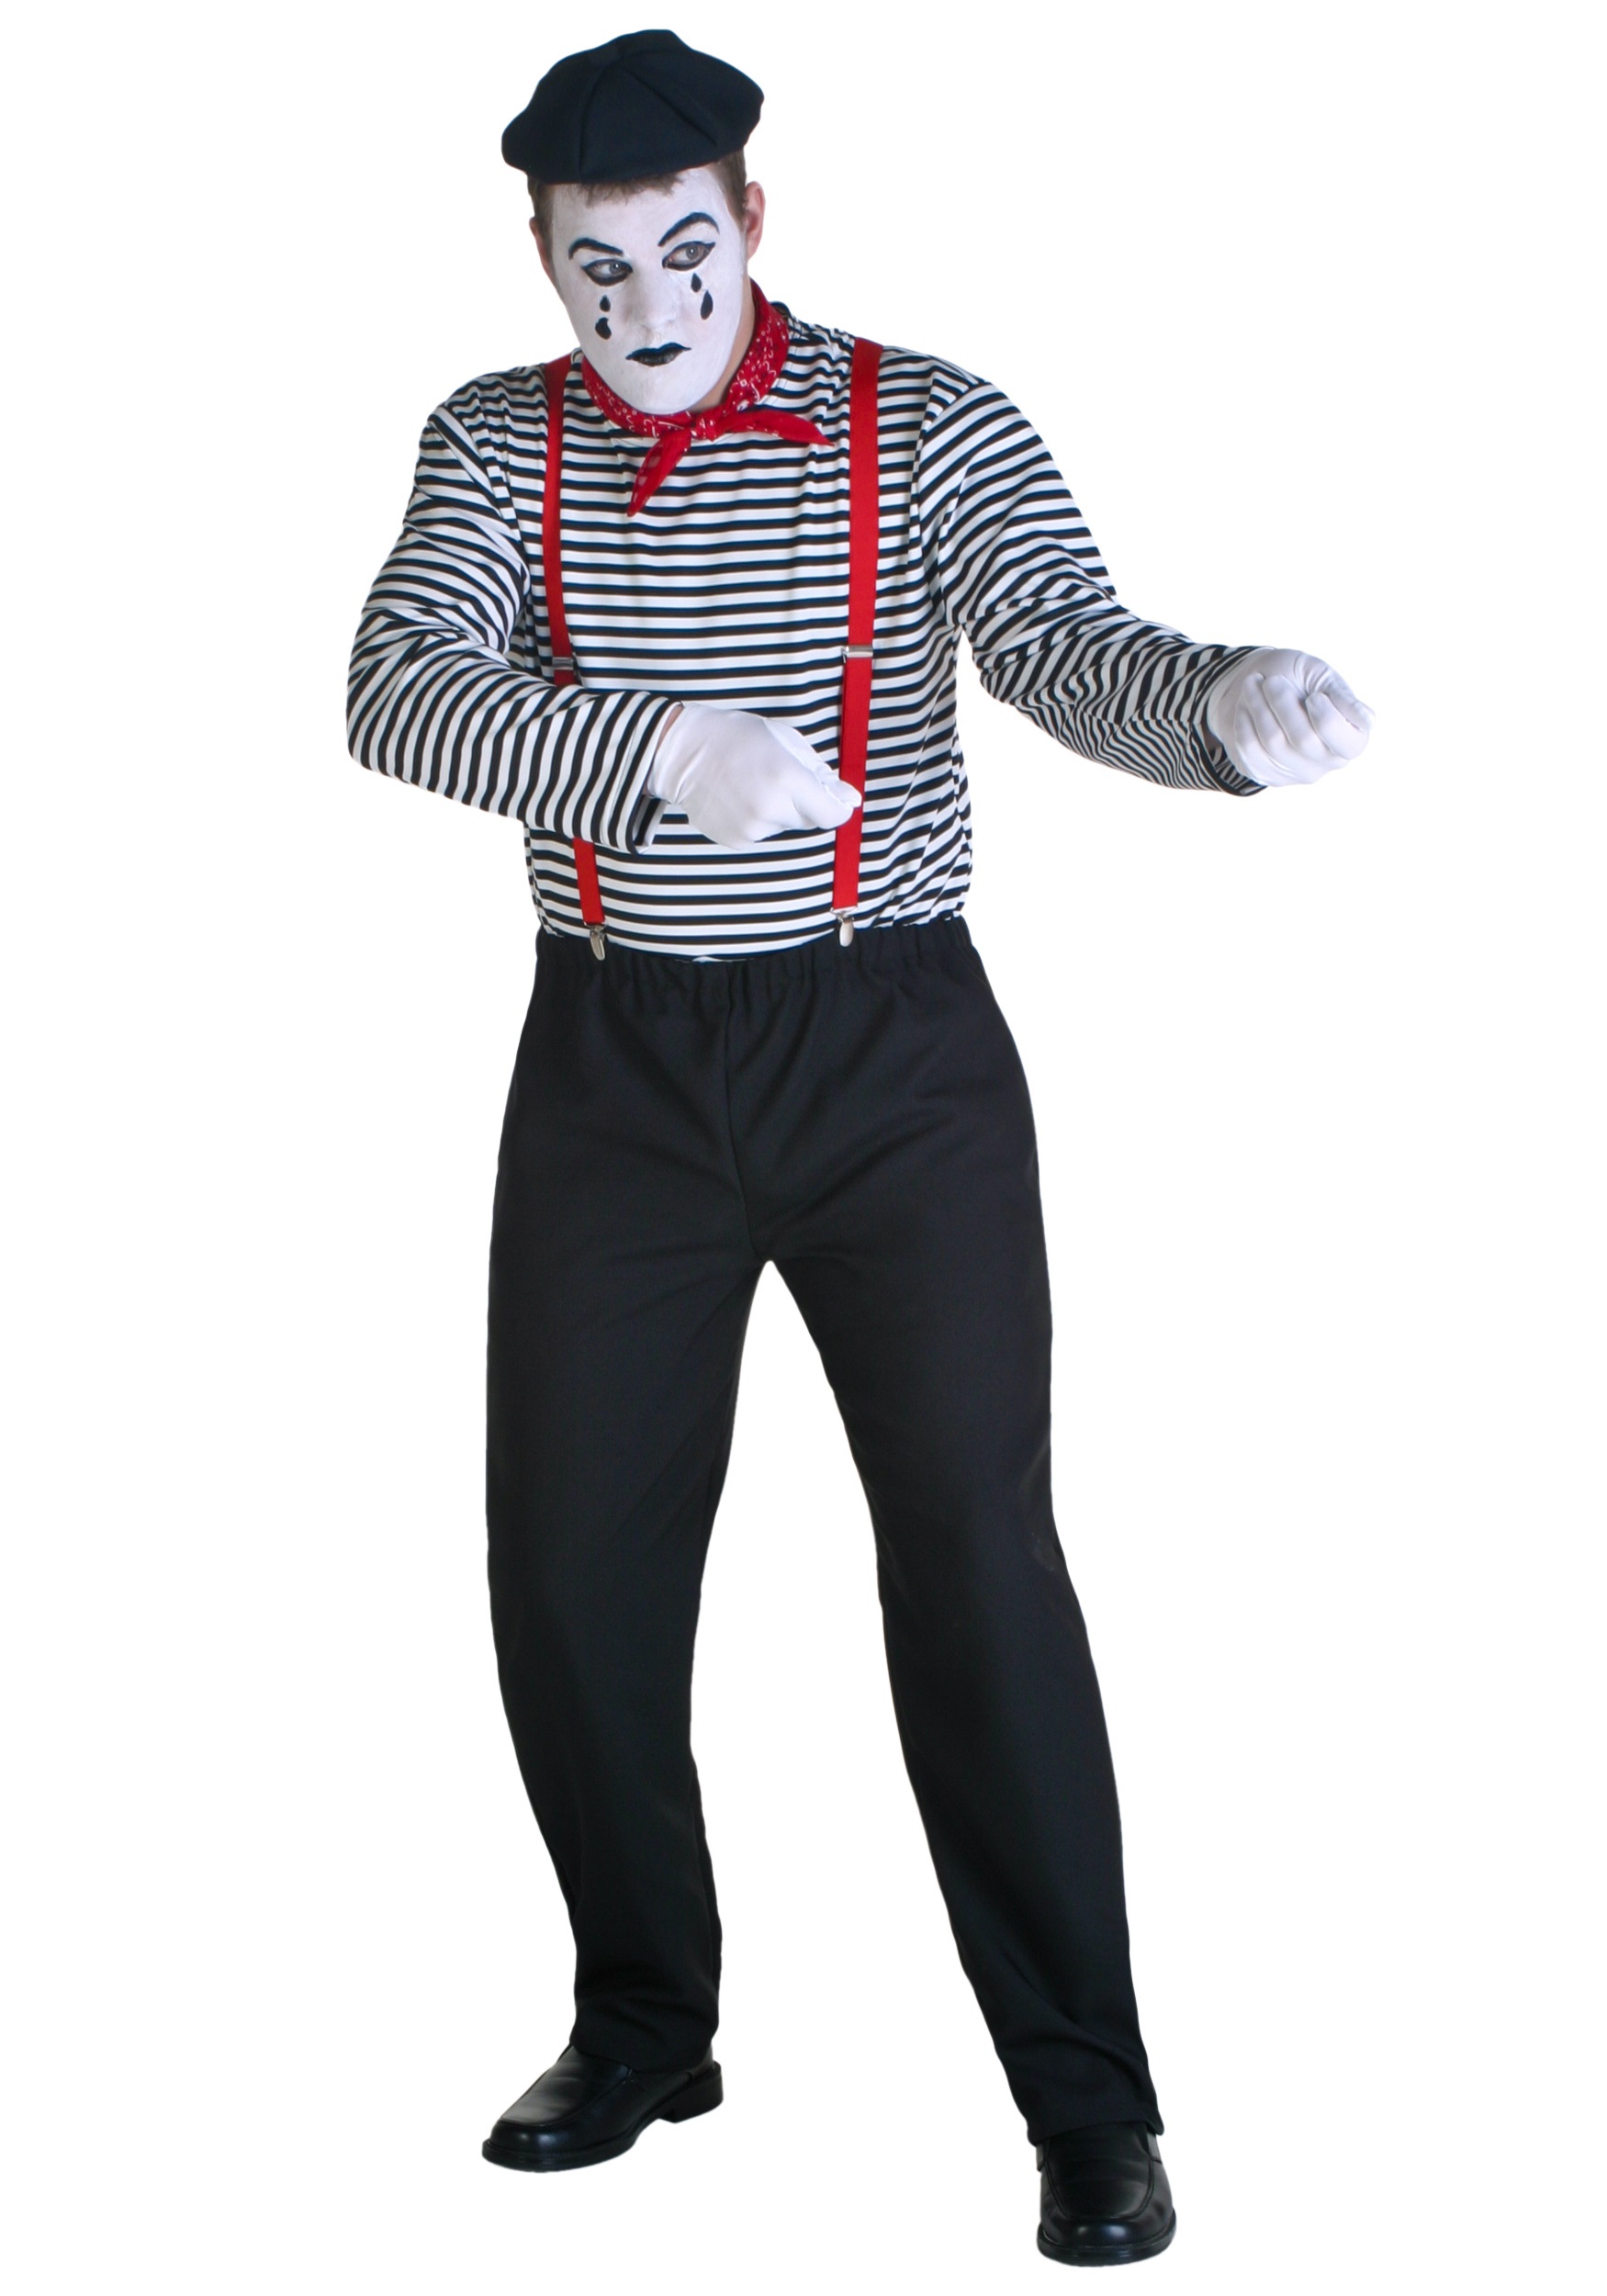 Adult Costume For Adult Size | Adult Costumes